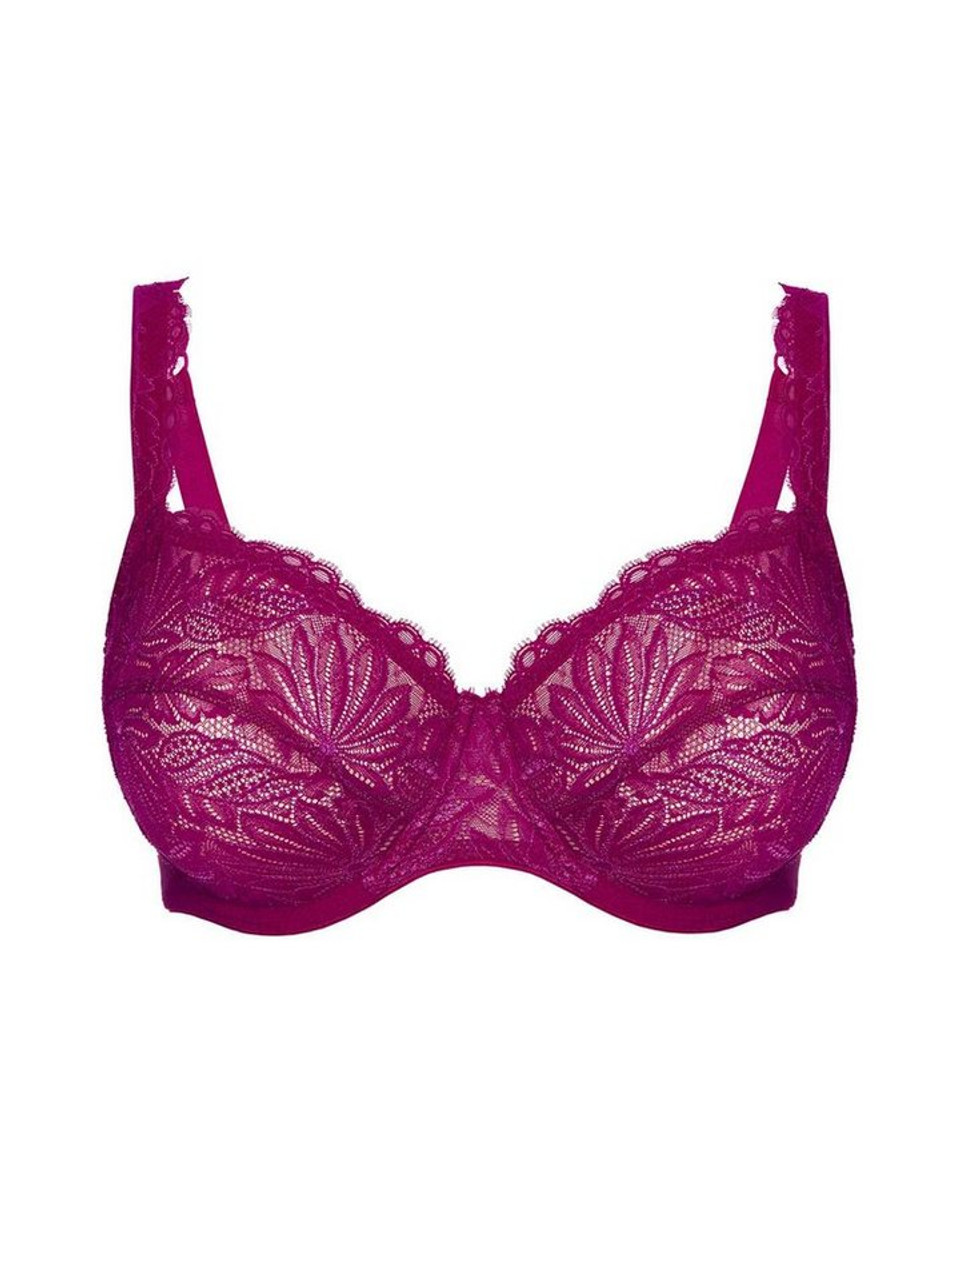 FLORAL JACQUARD SHELF Bra Open Cup Shows Nipples - LIMITED STOCK 2109  $23.95 - PicClick